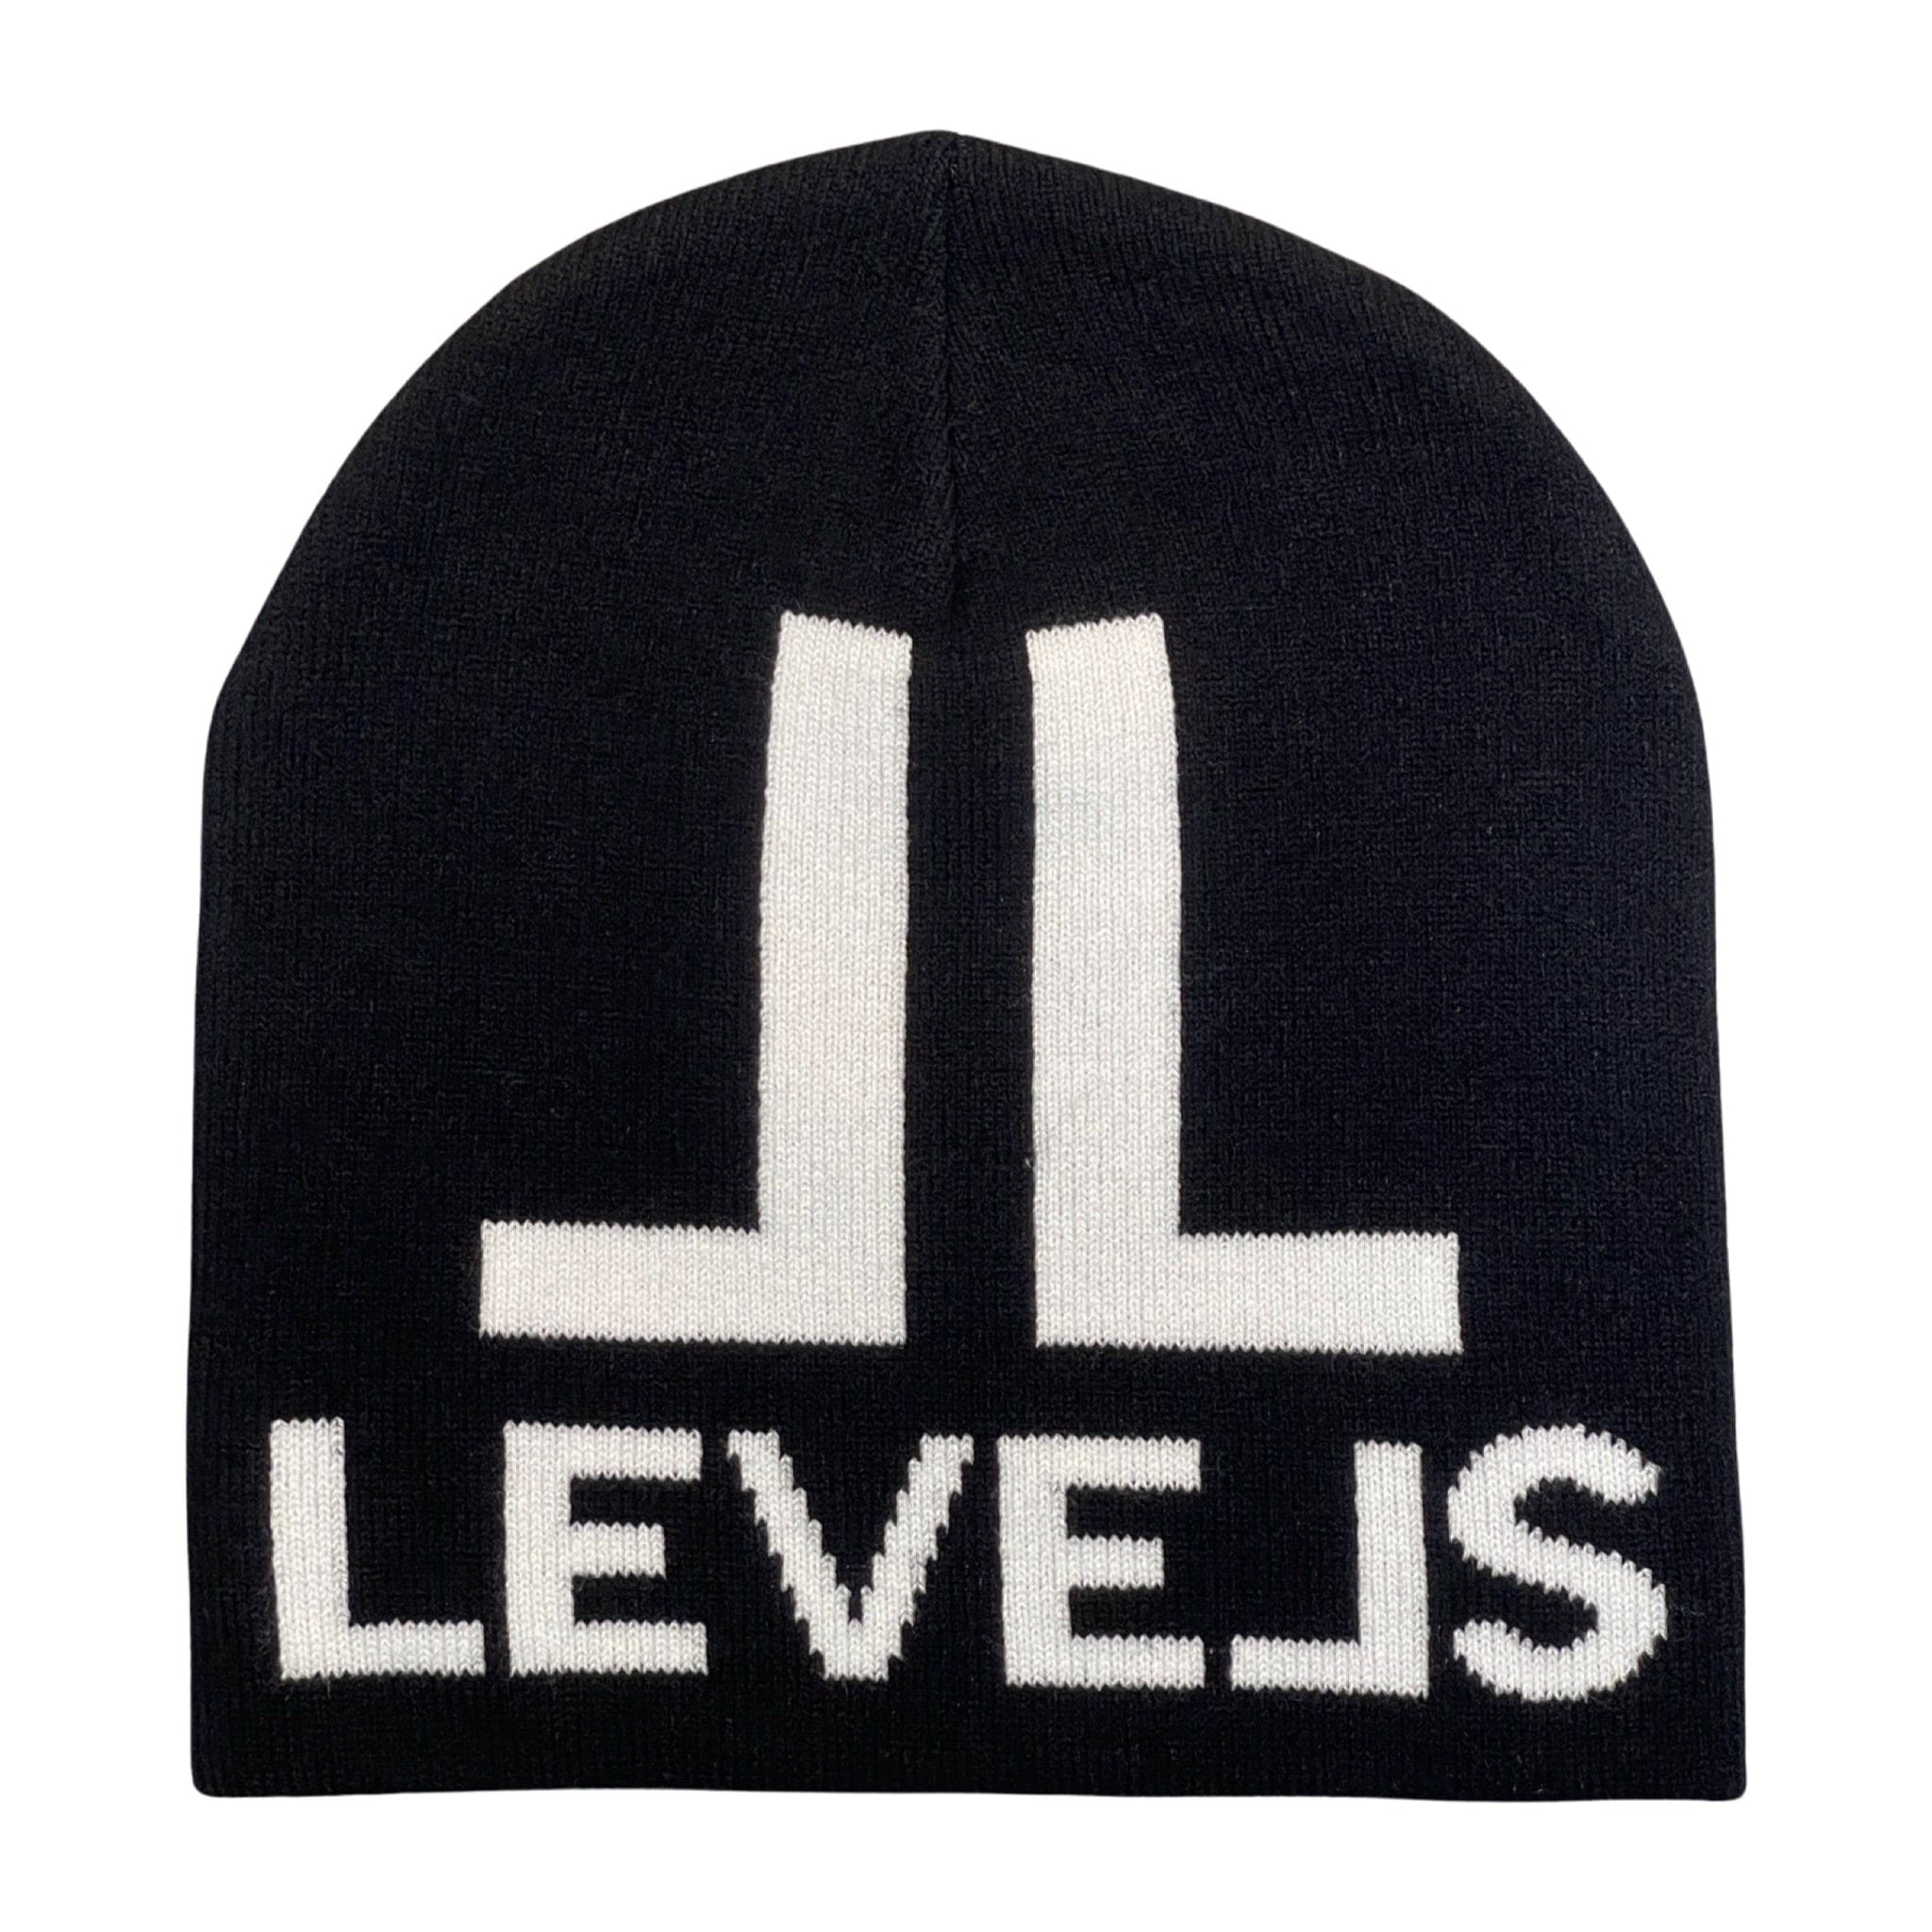 LEVELS, LLC Apparel & Accessories LUXE LEVELS JACQUARD KNIT BEANIE (MICIO COLLECTION)